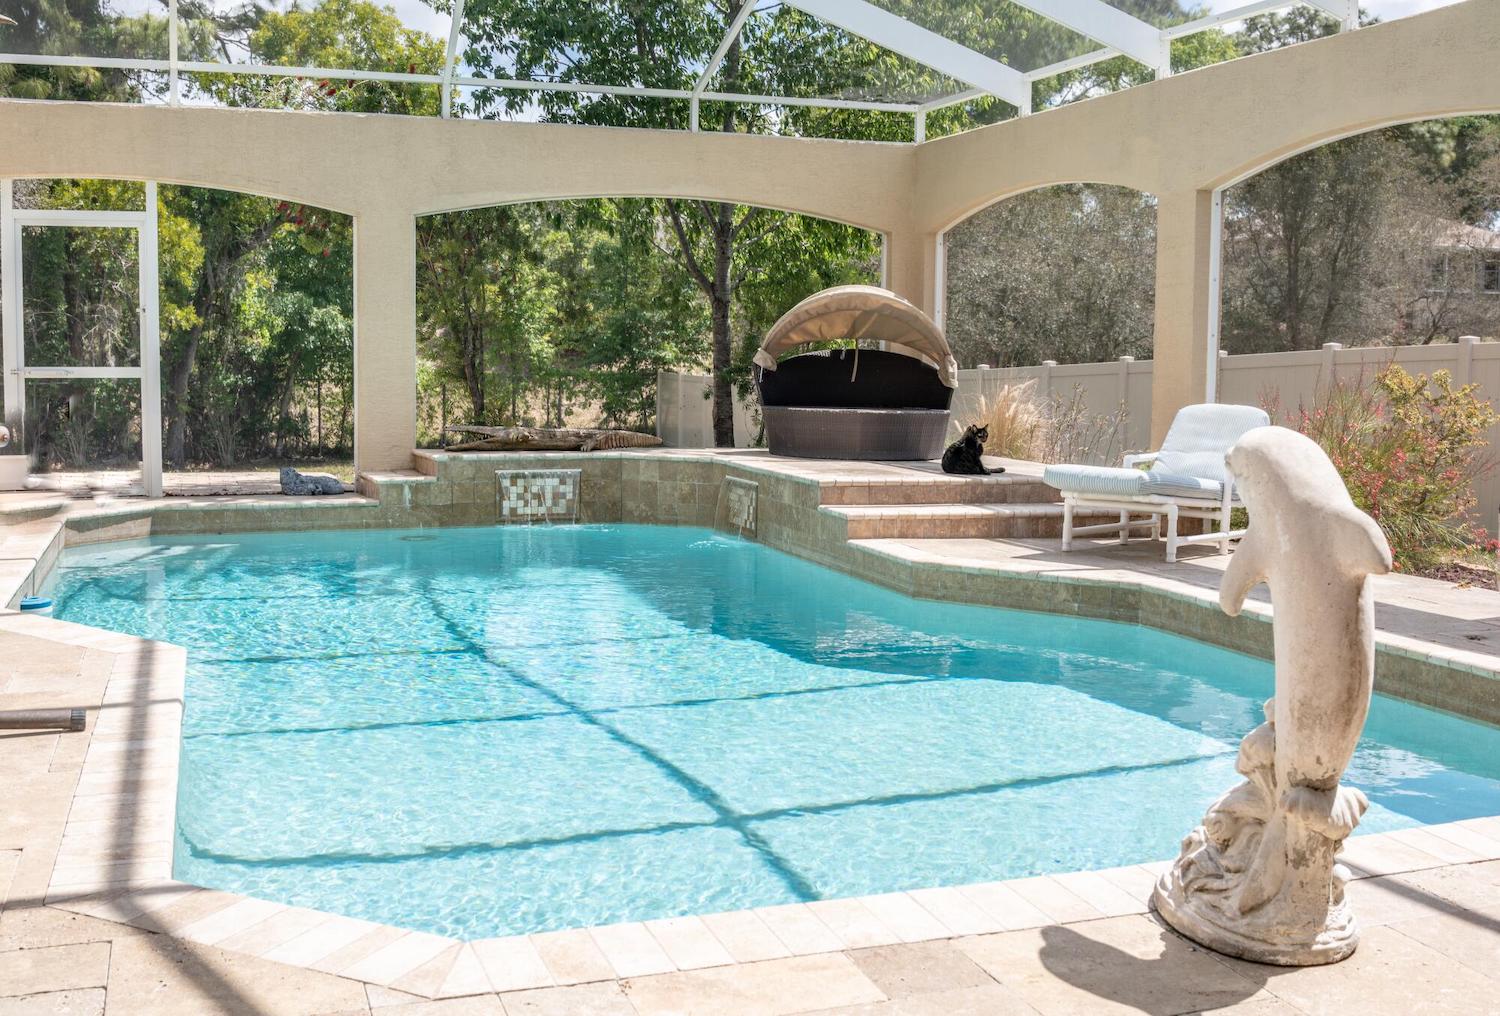 Saltwater vs. Chlorine Pools: Pros and Cons